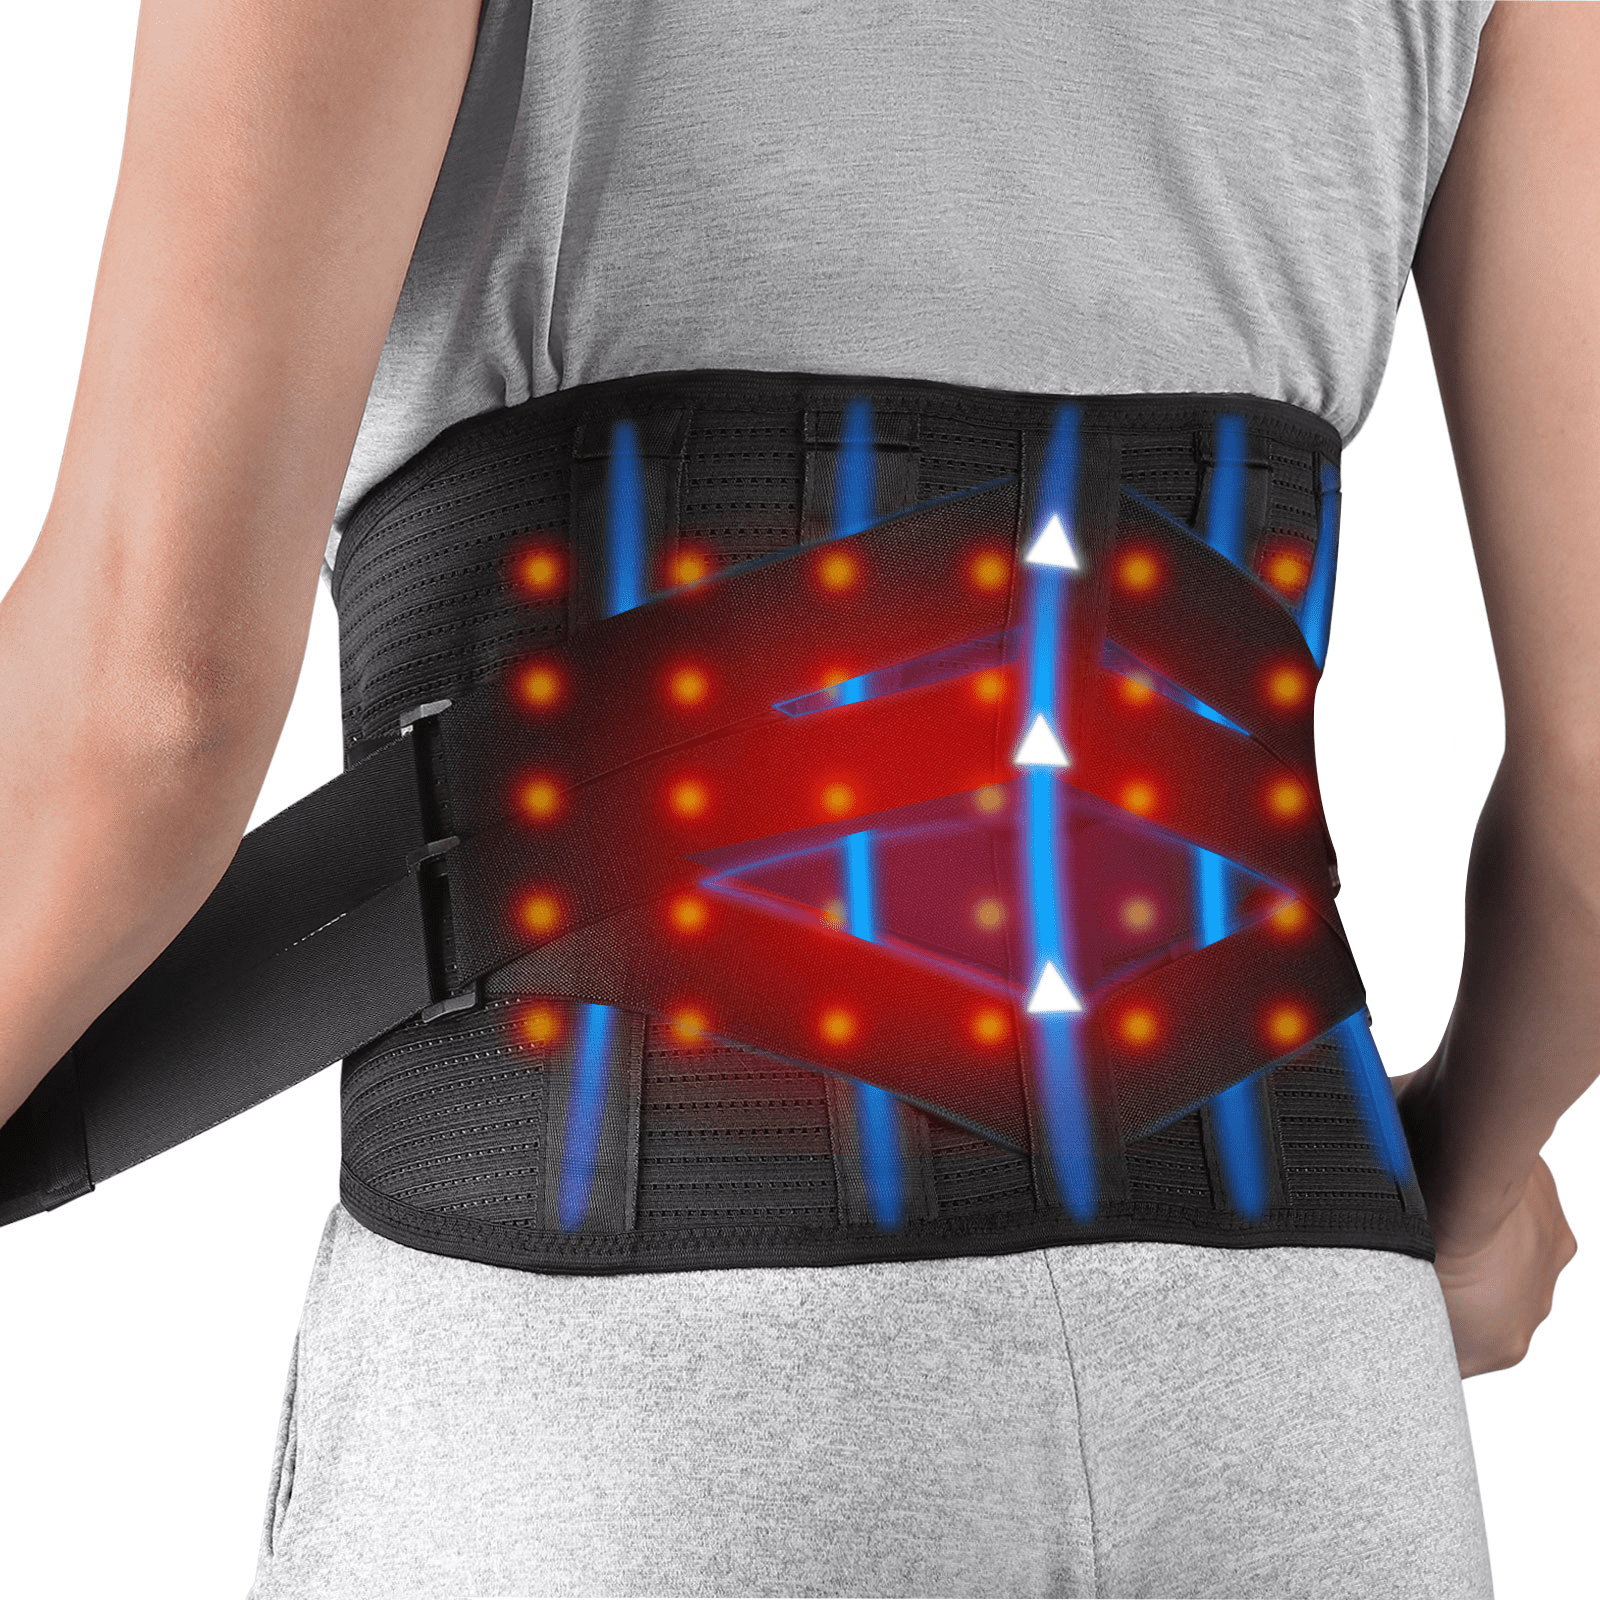 Back Brace, Cordless Heated Back Brace Compression Belt Wrap with Removable  Heating Pad & Metal Stays for Lower Back, Herniated Disc, Sciatica Pain